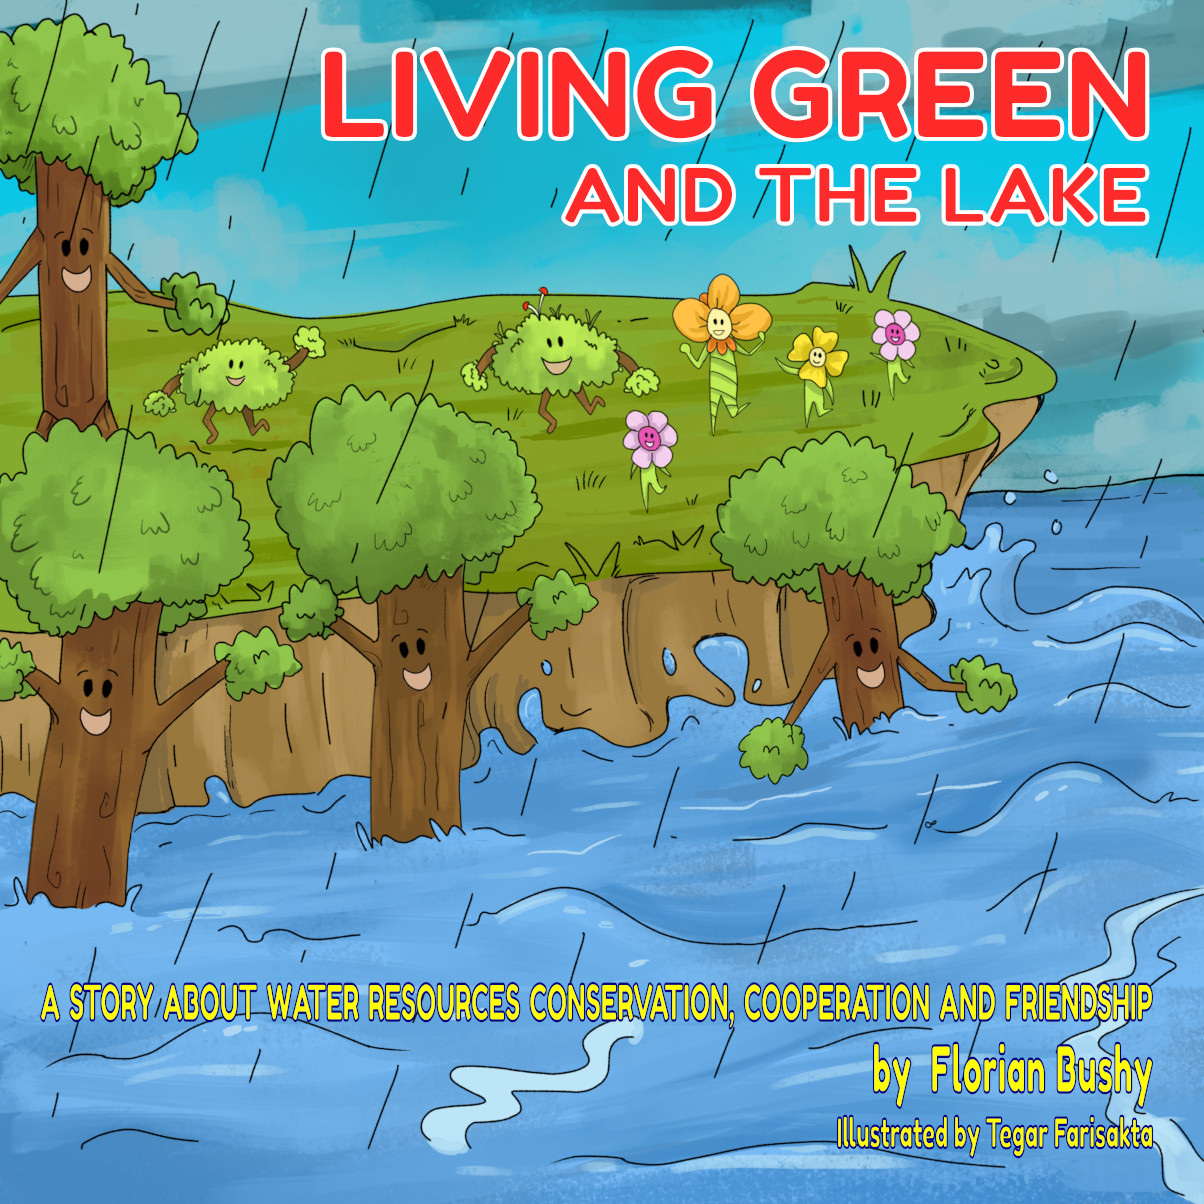 FREE: Living Green and the lake by Florian Bushy